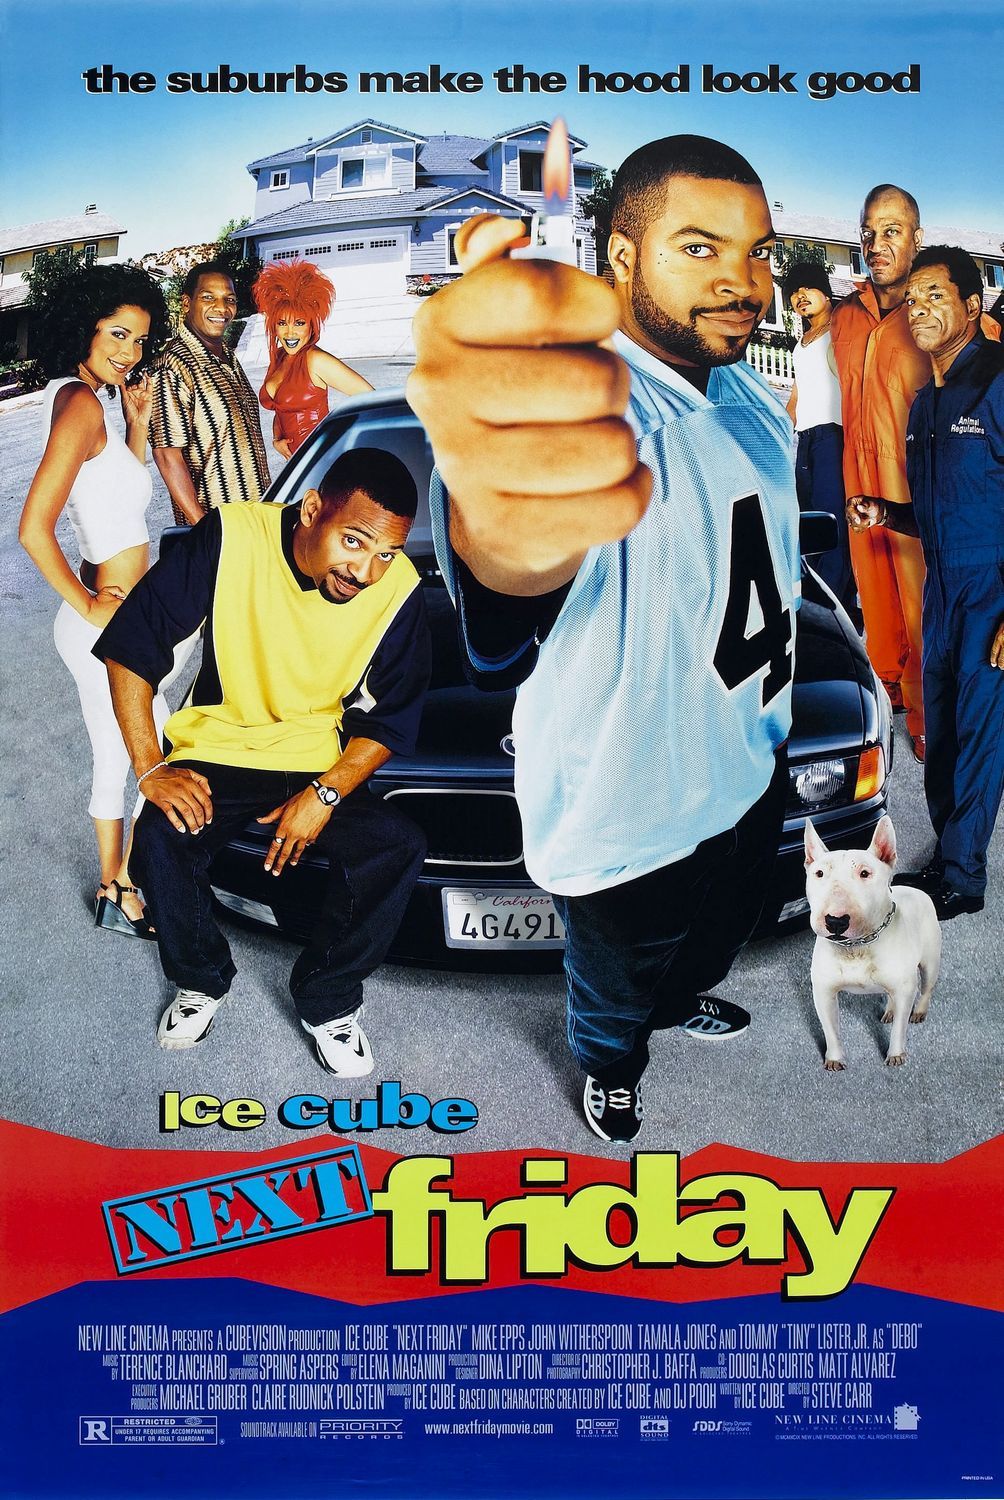 BACK IN THE DAY |1/12/00| The movie, Next Friday, is released in theaters.